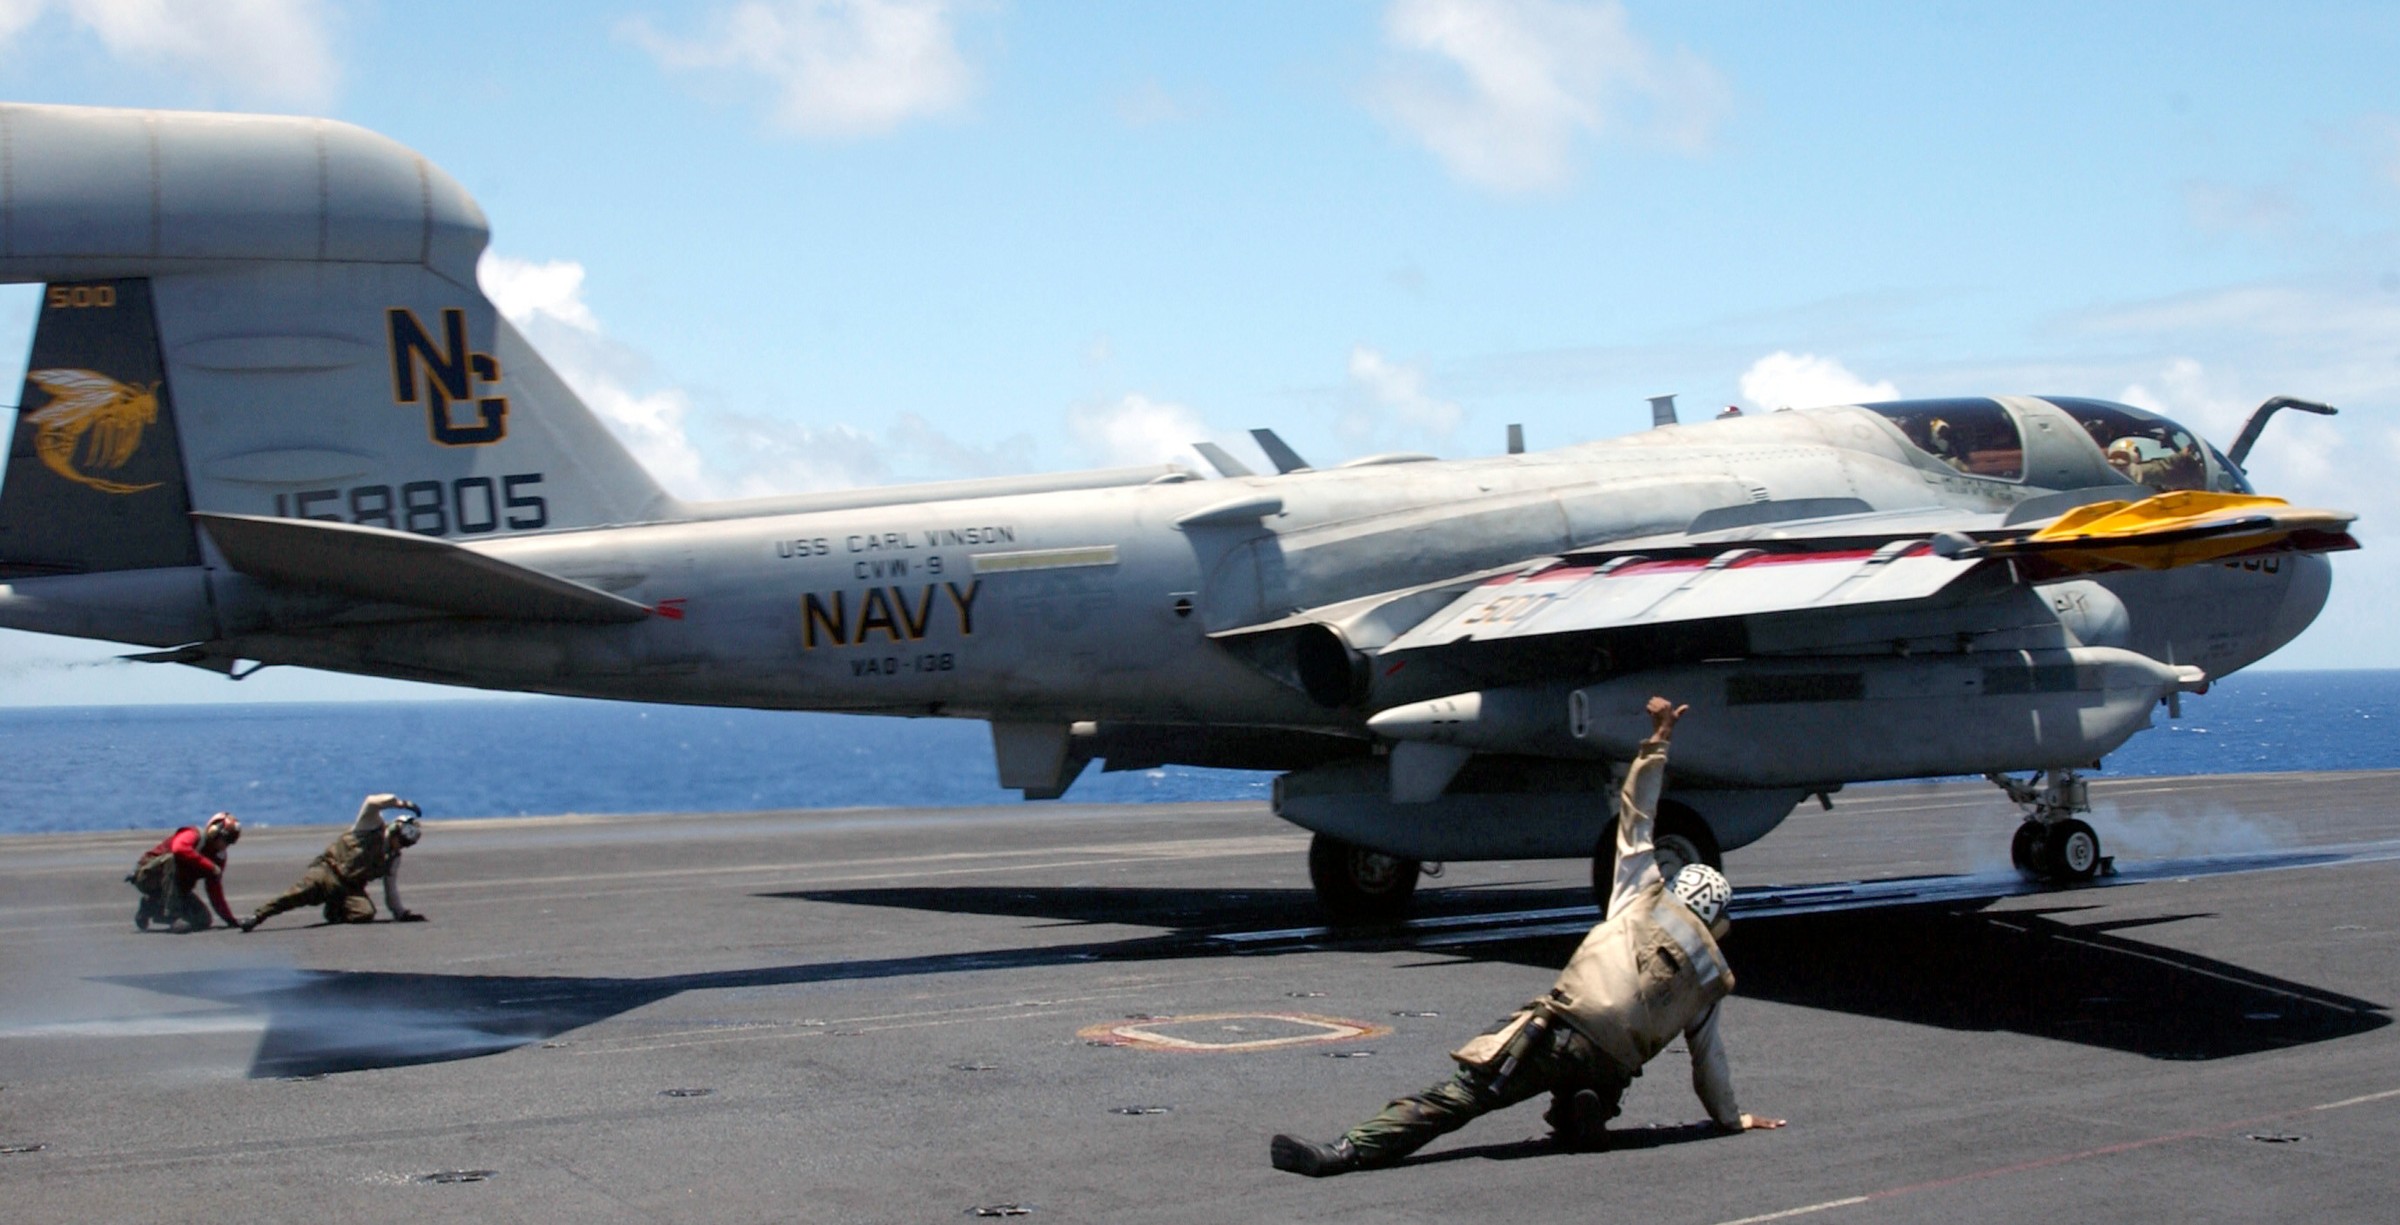 vaq-138 yellowjackets electronic attack squadron us navy ea-6b prowler carrier air wing cvw-9 uss carl vinson cvn-70 07